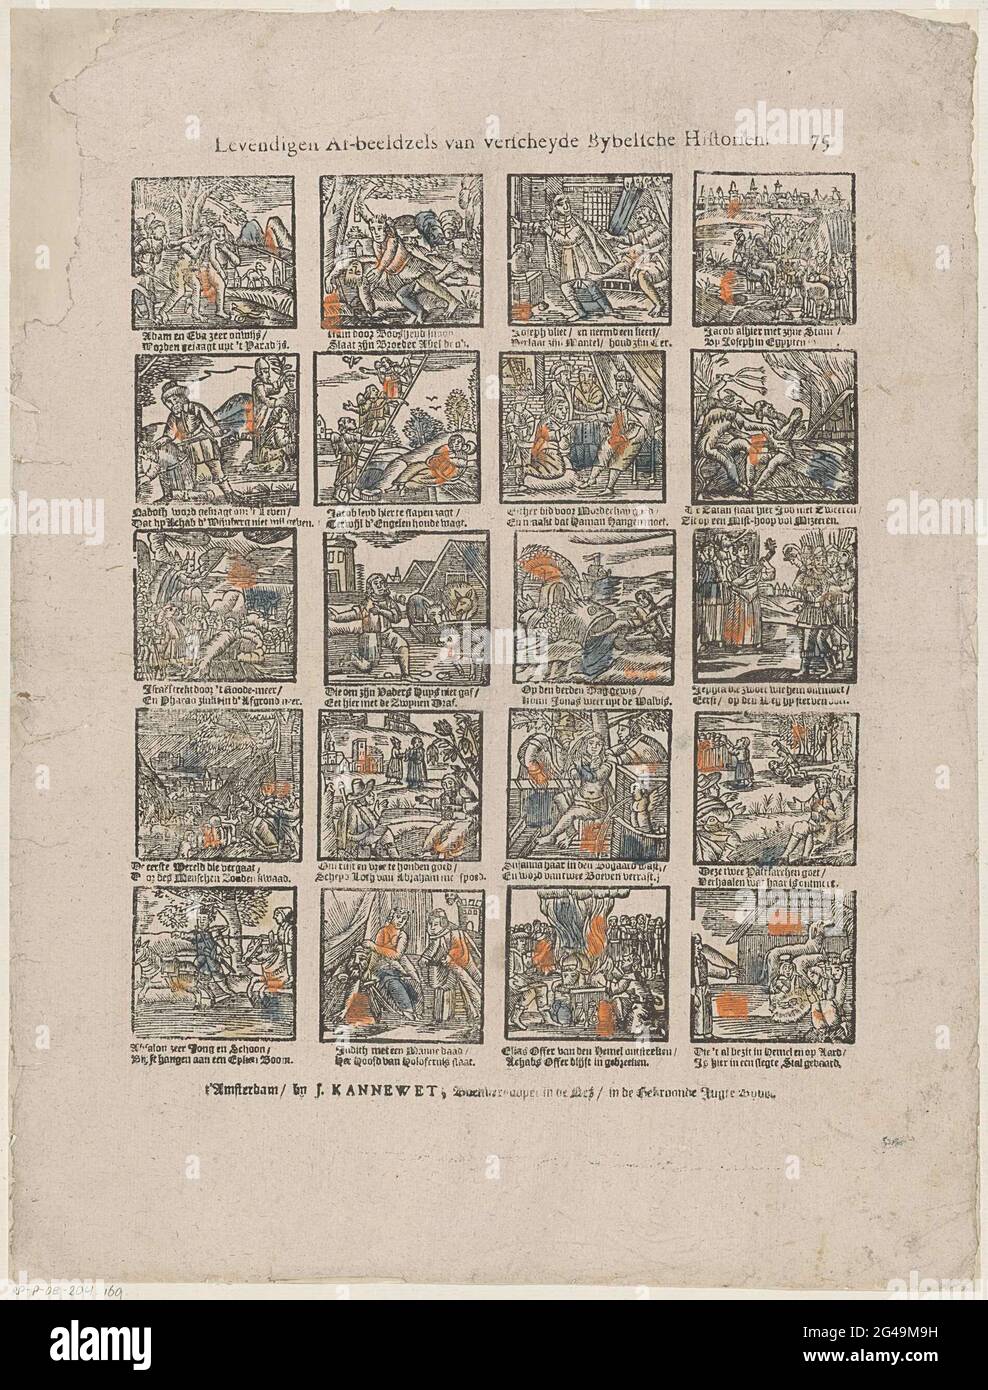 Lifive Afscels from Gifted Bybelsche Historien. Sheet with 20 representations of stories from the Old Testament, including Adam and Eve that are expelled from paradise and Jonah thrown in dryness. Under each image a two-legged fresh. Numbered at the top right: 75. Stock Photo